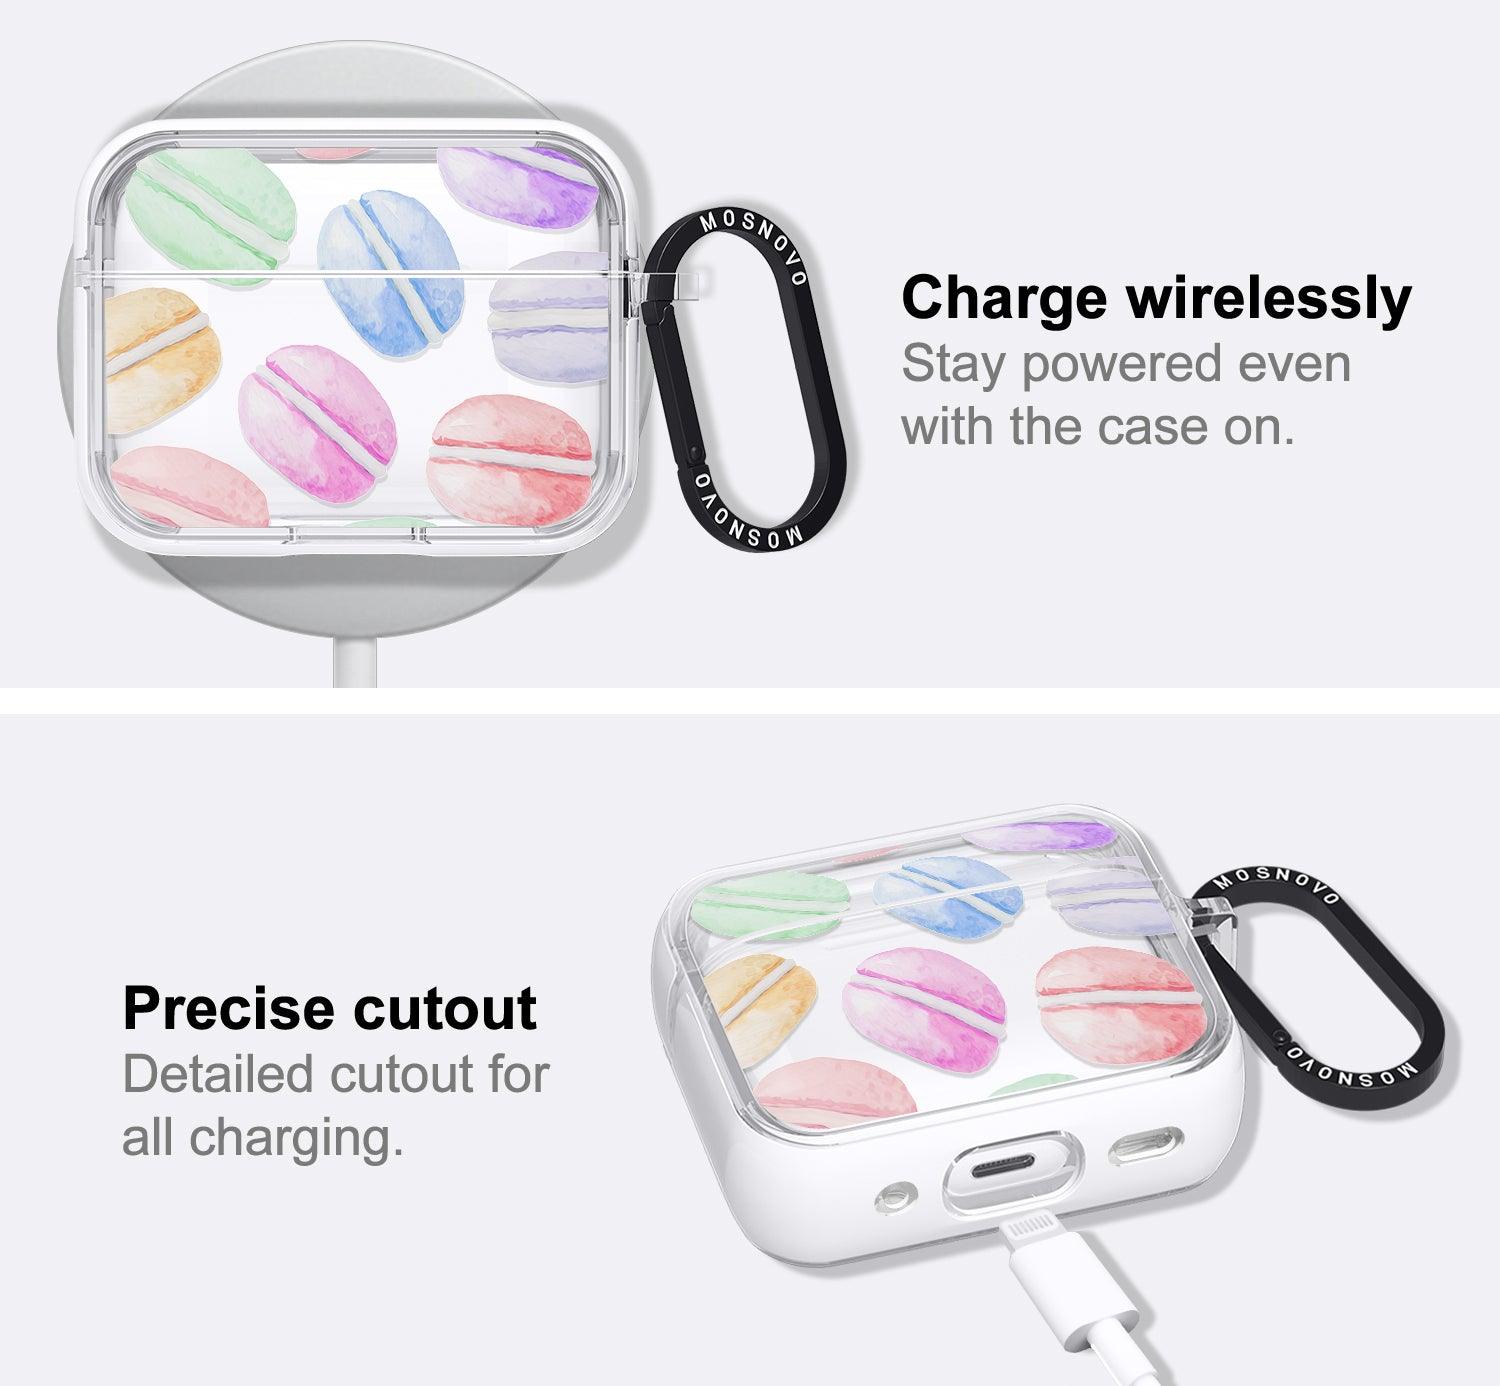 Macarons AirPods Pro 2 Case (2nd Generation) - MOSNOVO